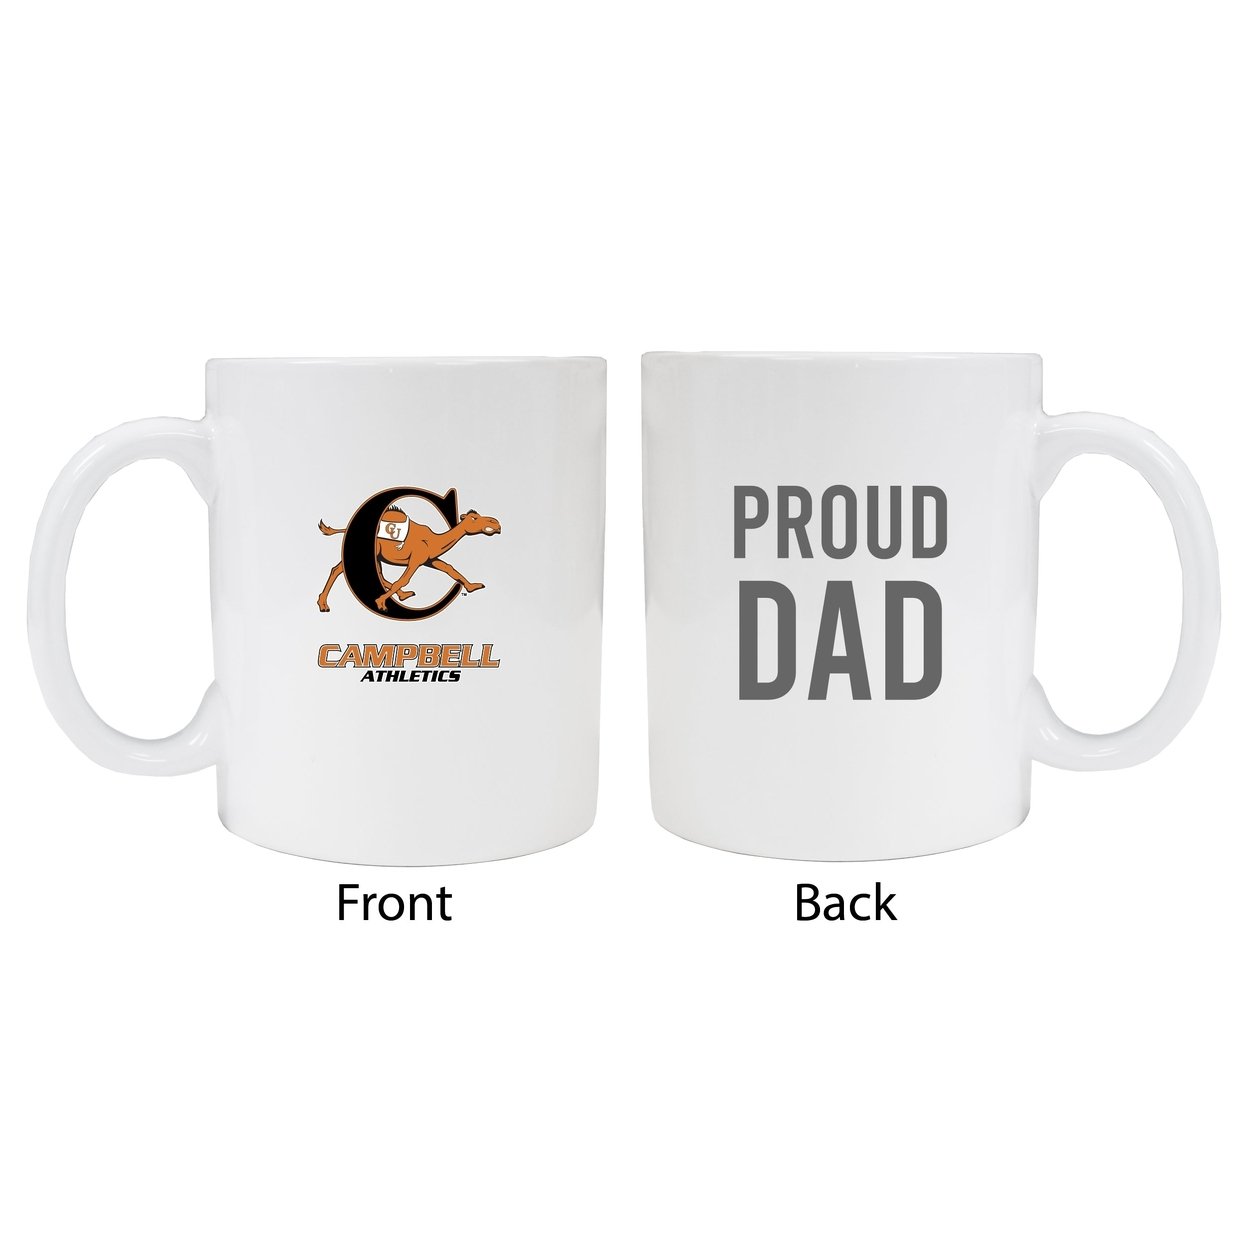 Campbell University Fighting Camels Proud Dad Ceramic Coffee Mug - White (2 Pack)